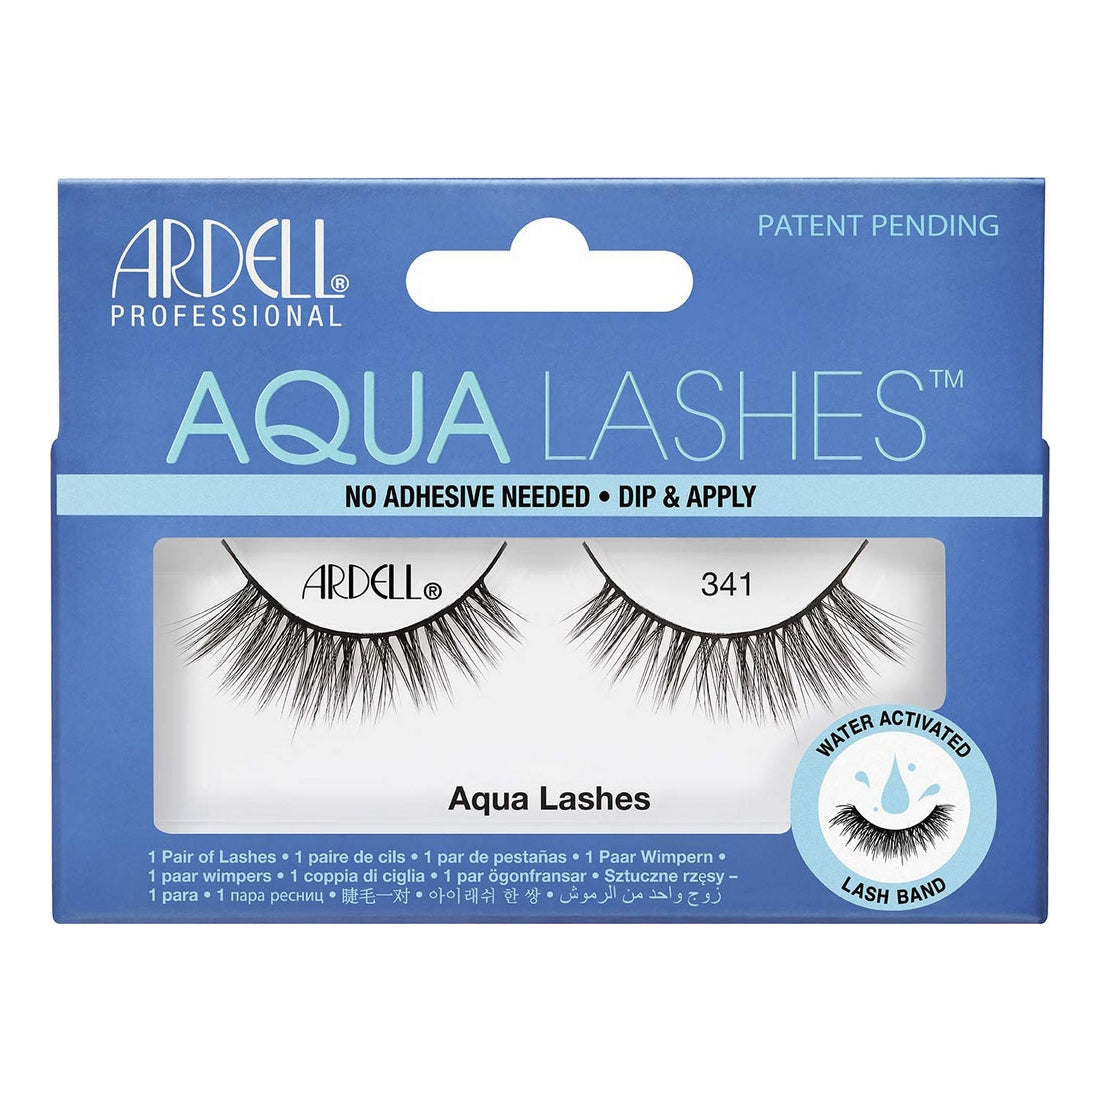 Valse Wimpers Aqua Lashes Ardell 63402 Nº 341